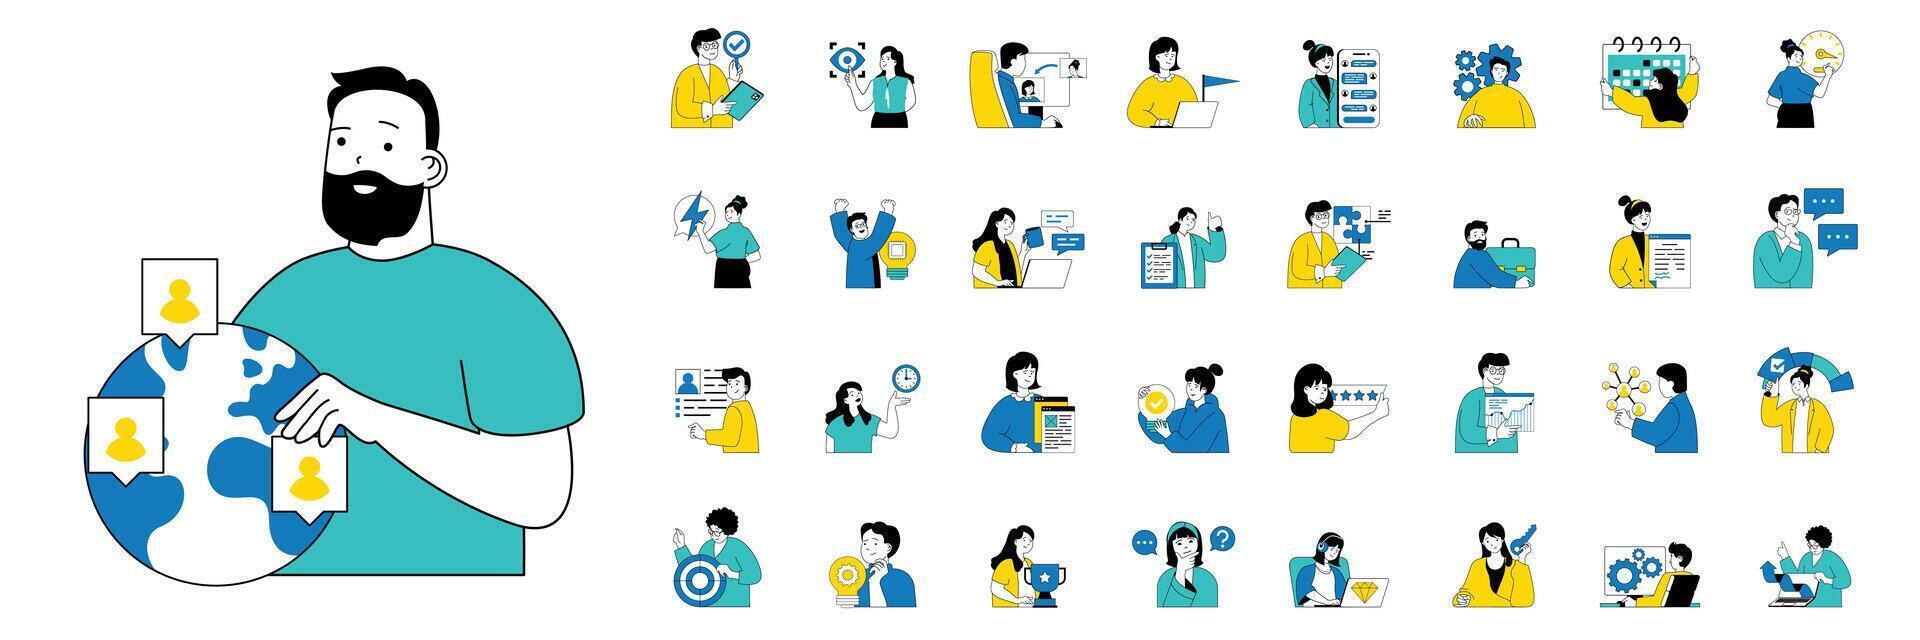 Teamwork concept with character situations mega set in flat web design. Bundle of scenes people working in team, discussing and communicating, colleagues do tasks to deadline. Vector illustrations.